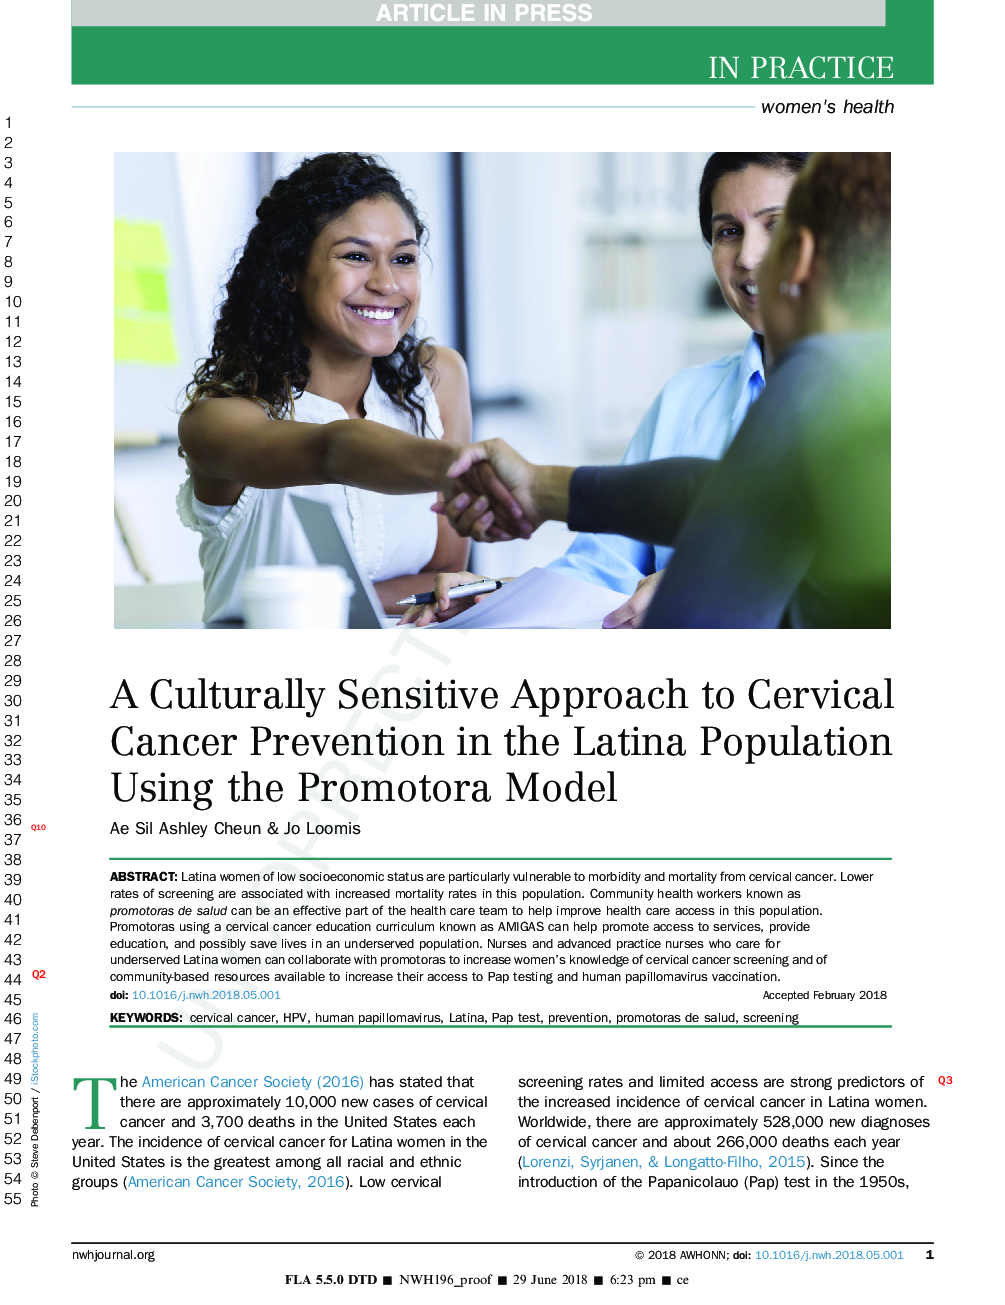 A Culturally Sensitive Approach to Cervical Cancer Prevention in the Latina Population Using the Promotora Model